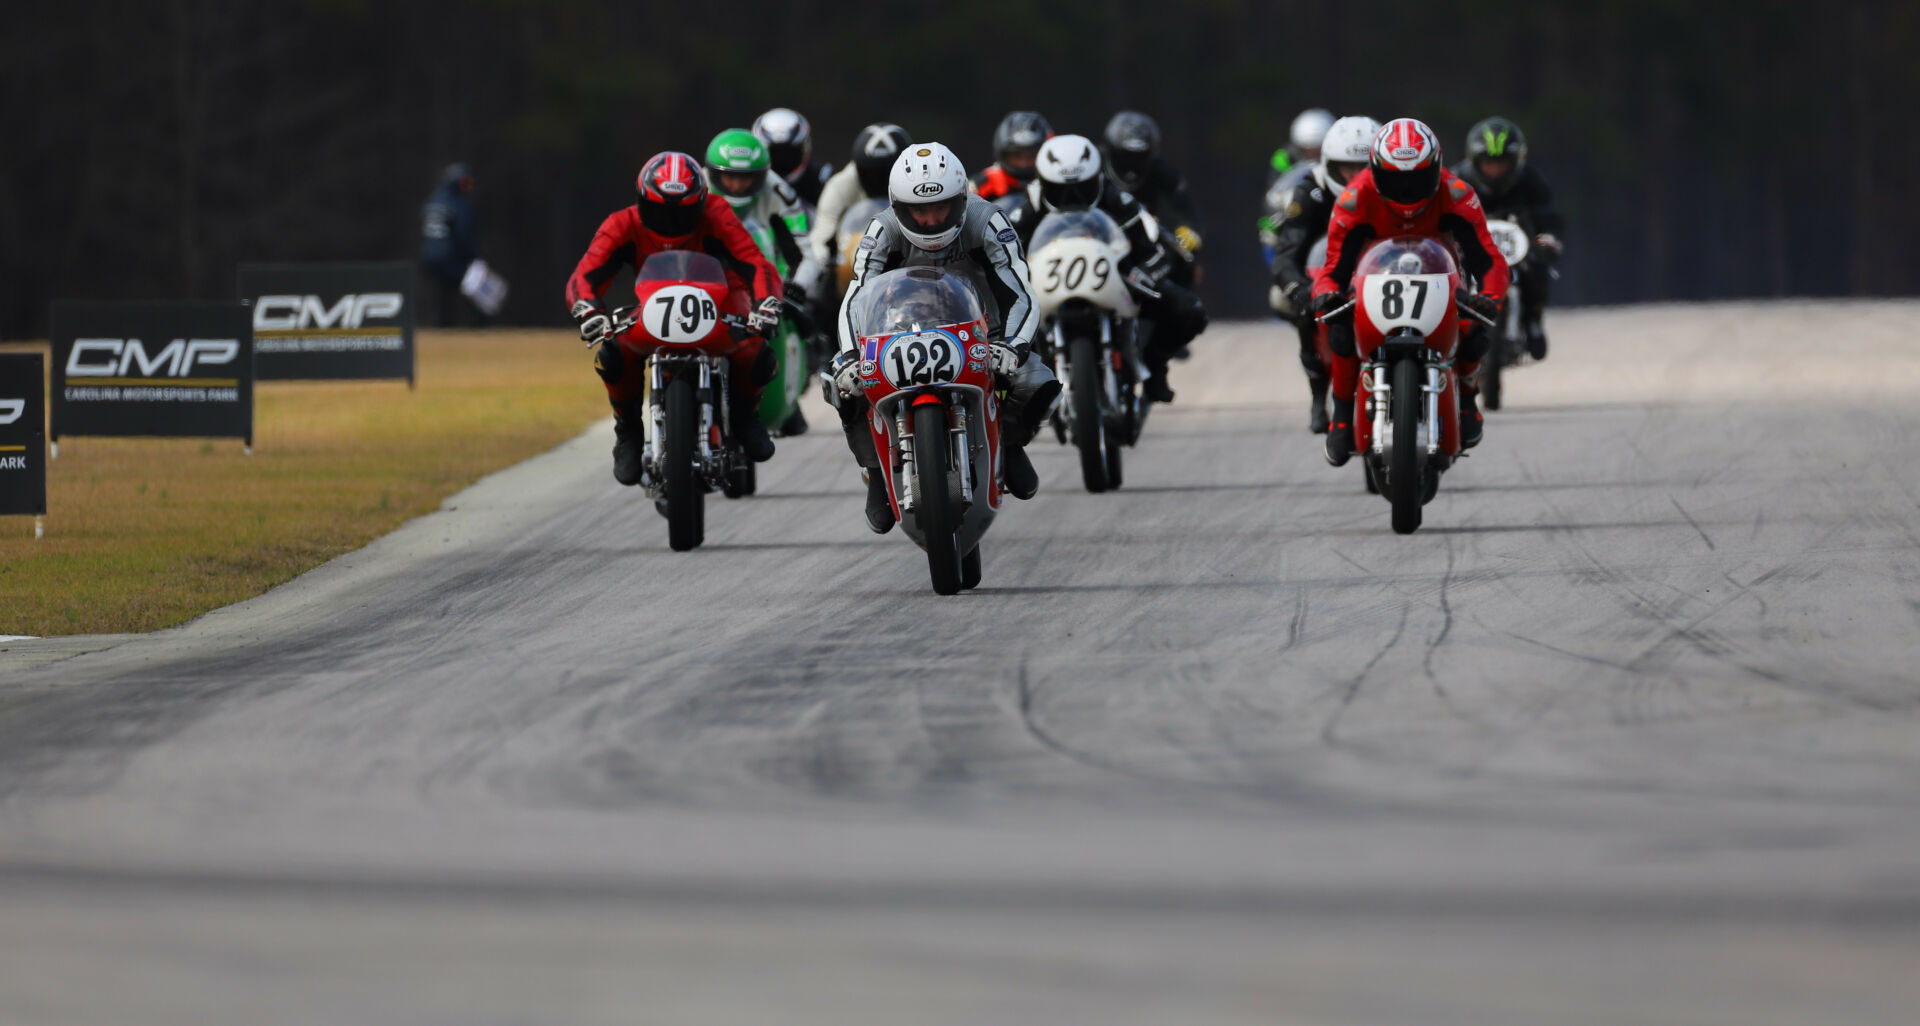 Action from an AHRMA 350 GP race at Carolina Motorsports Park in 2022 with Alex McLean (122) leading Craig Light (79R), Eric Watts (87), and Tim Joyce (309). Photo by etechphoto.com, courtesy AHRMA.